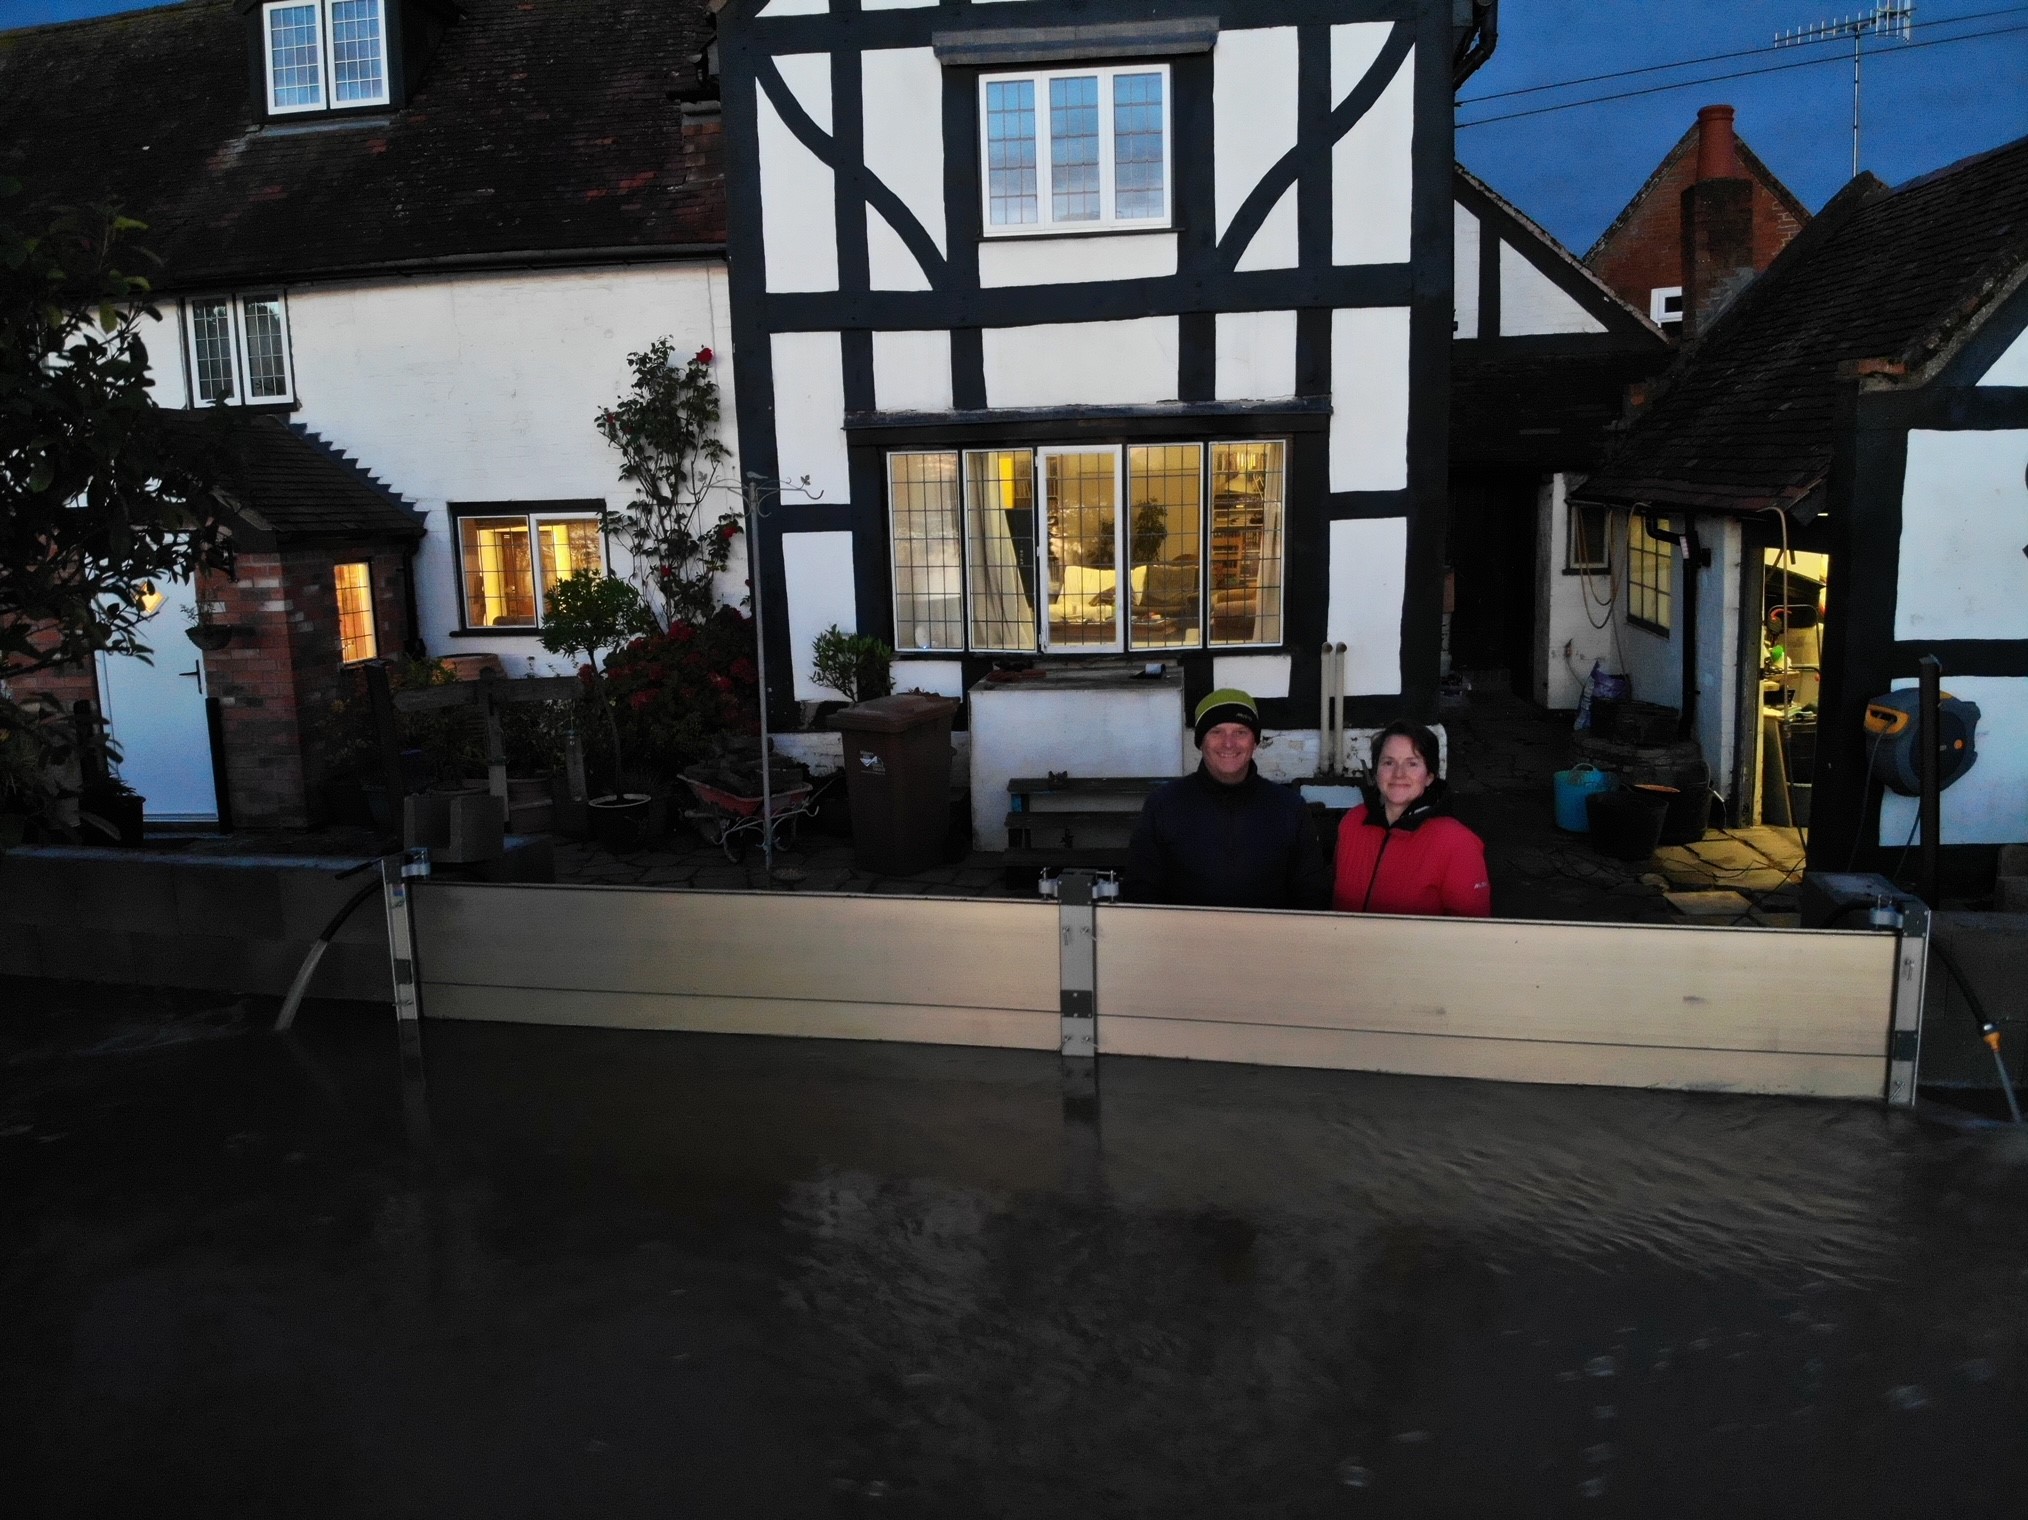 Lakeside Barriers protect properties in Storm Henk